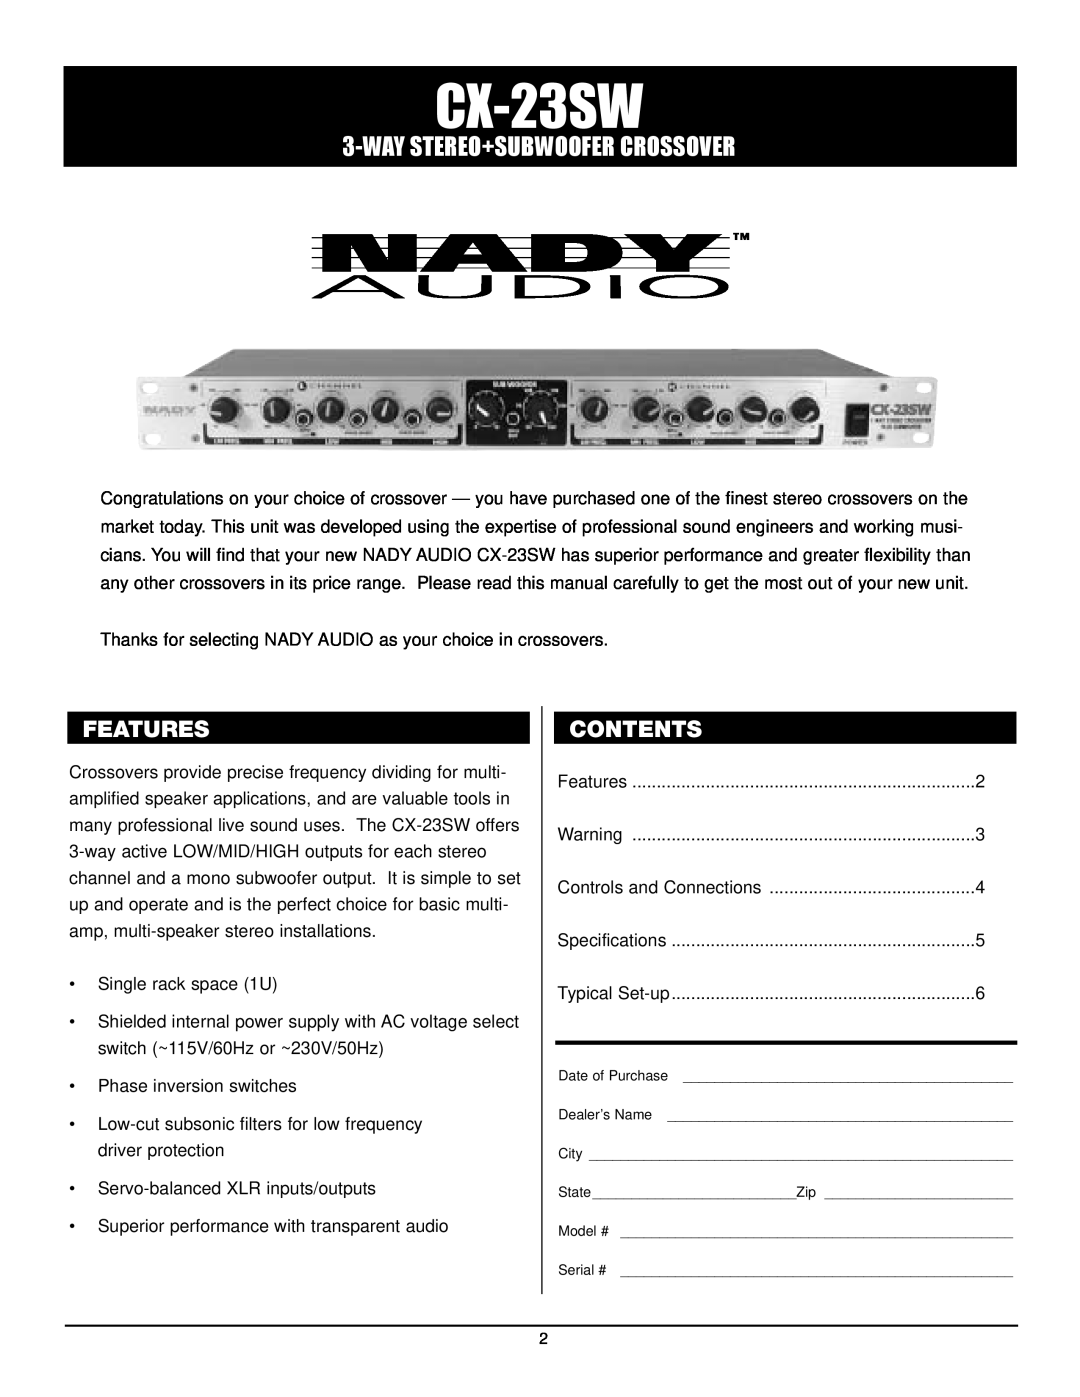 Nady Systems CX-23SW owner manual Features, Contents, Waystereo+Subwoofer Crossover 